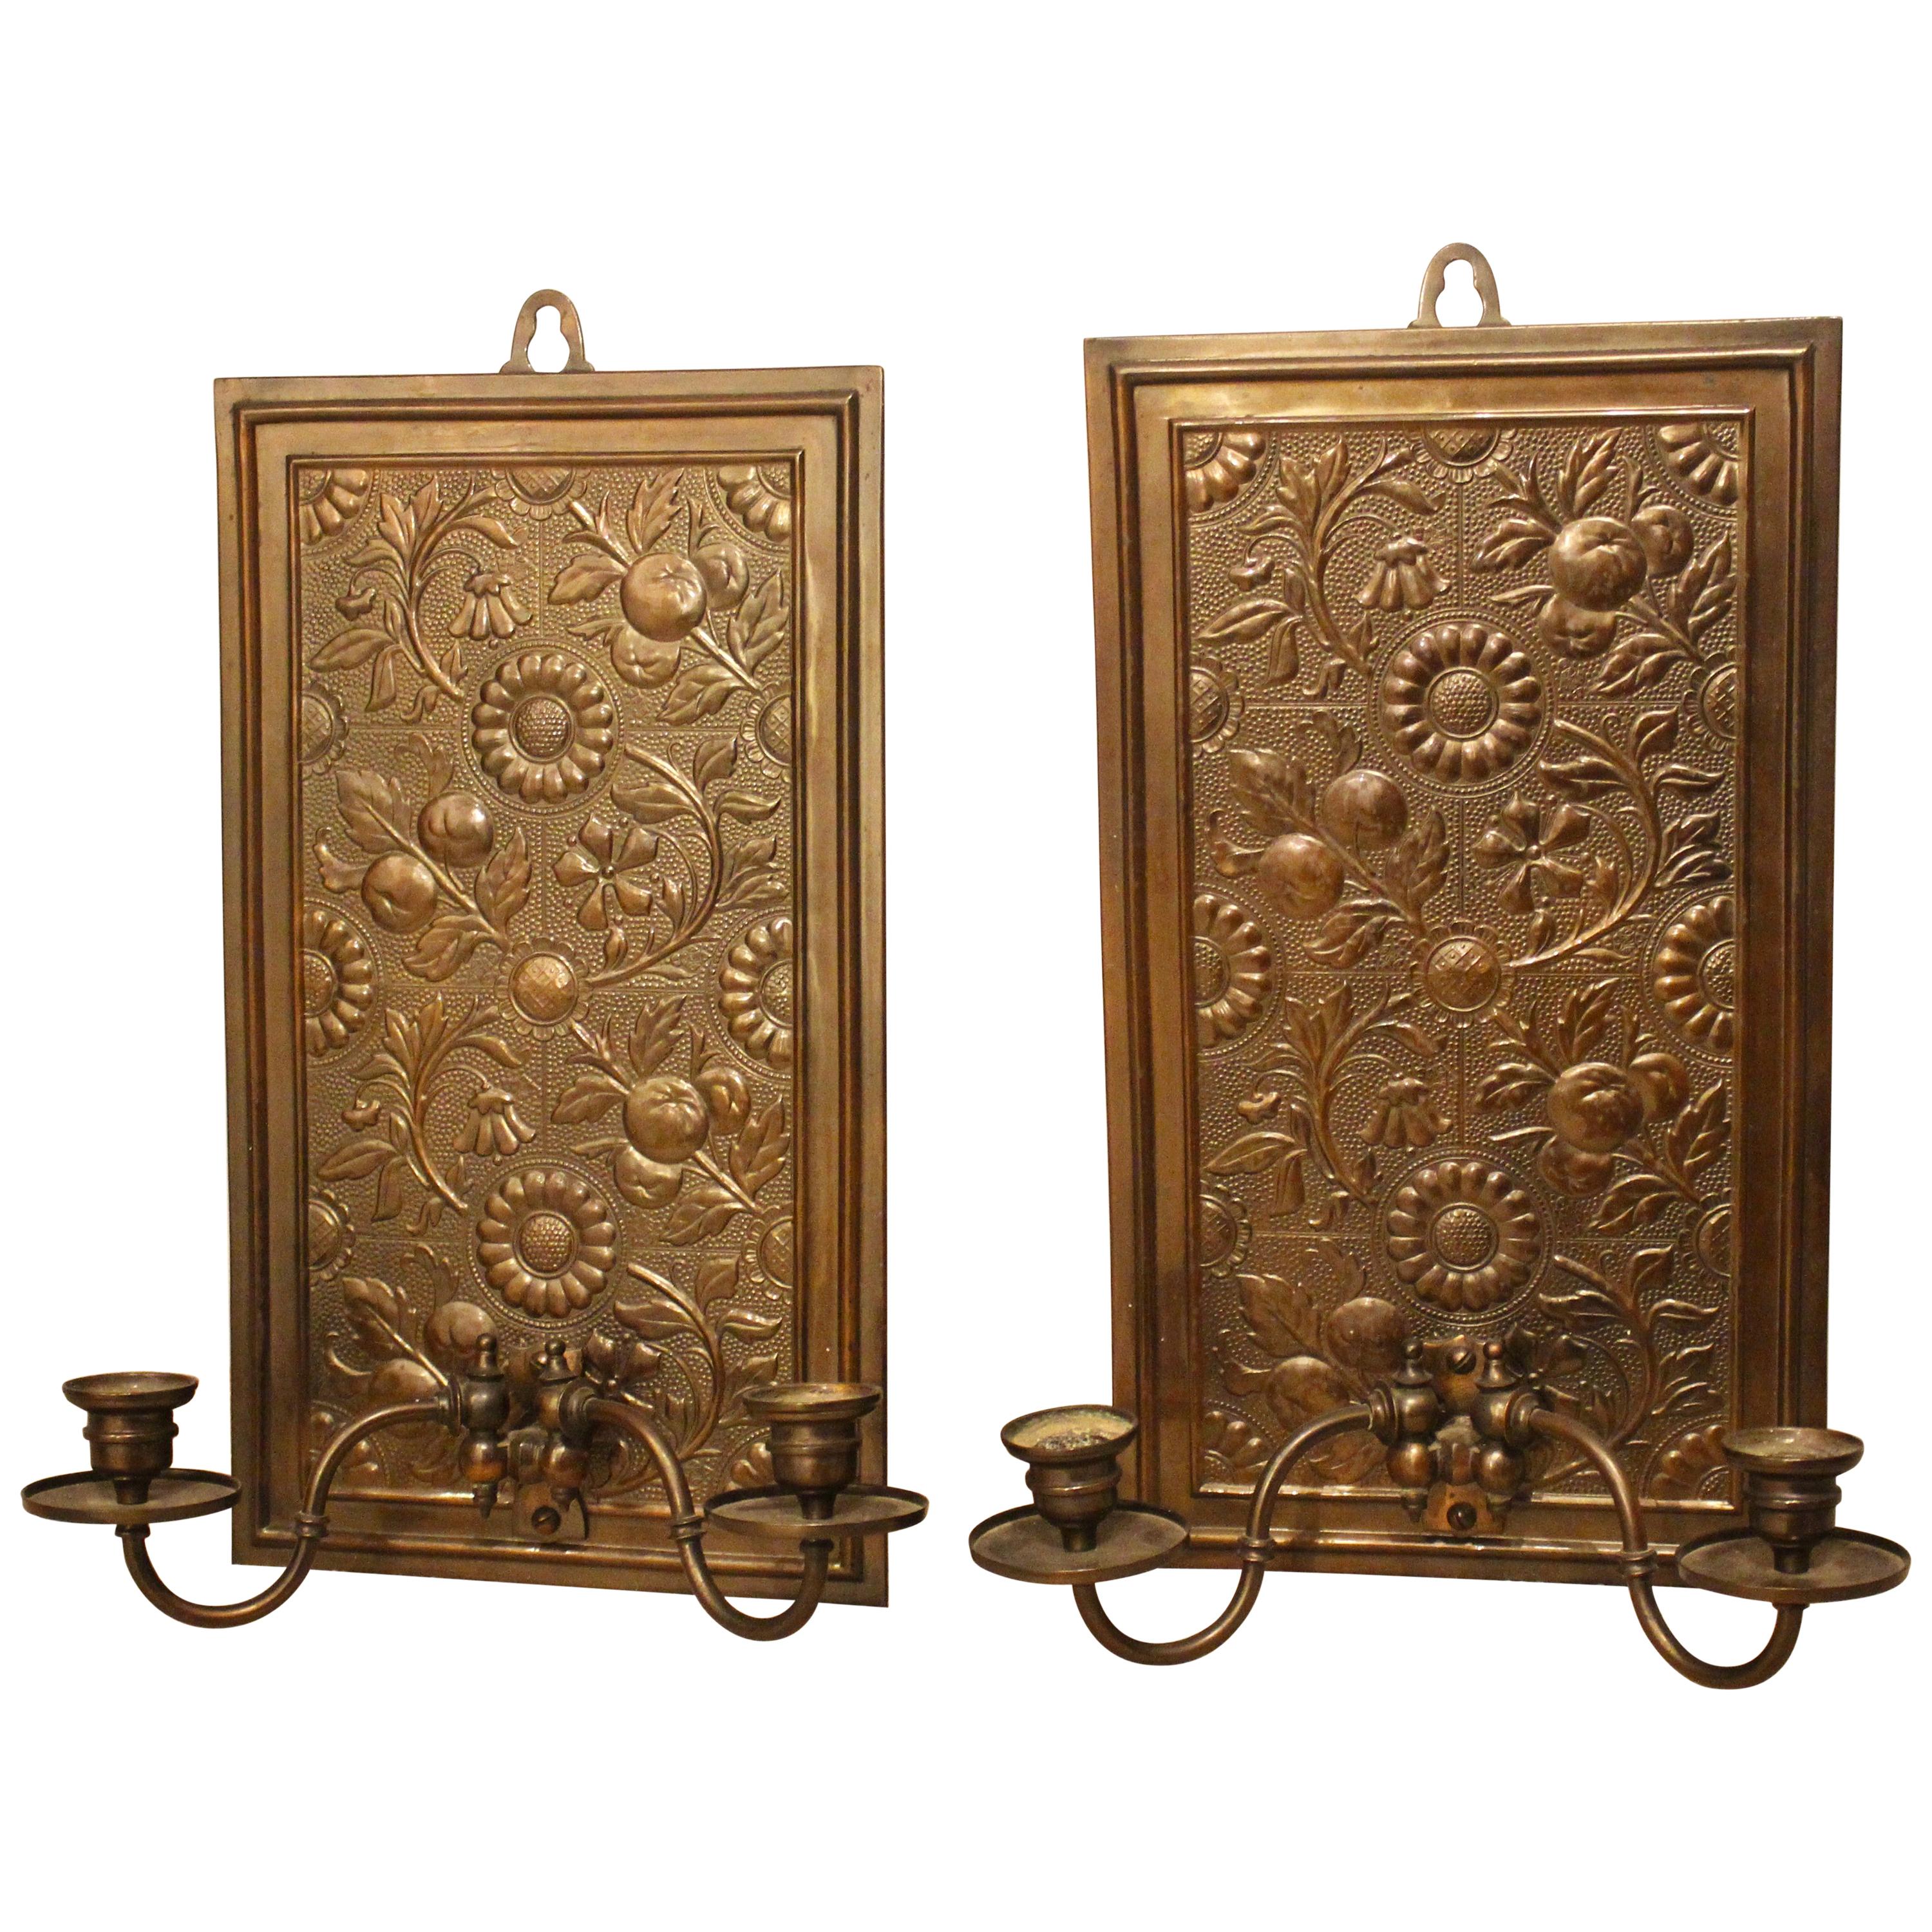 Pair of Brass Wall Sconces in the Manner of Thomas Jeckyll, circa 1880